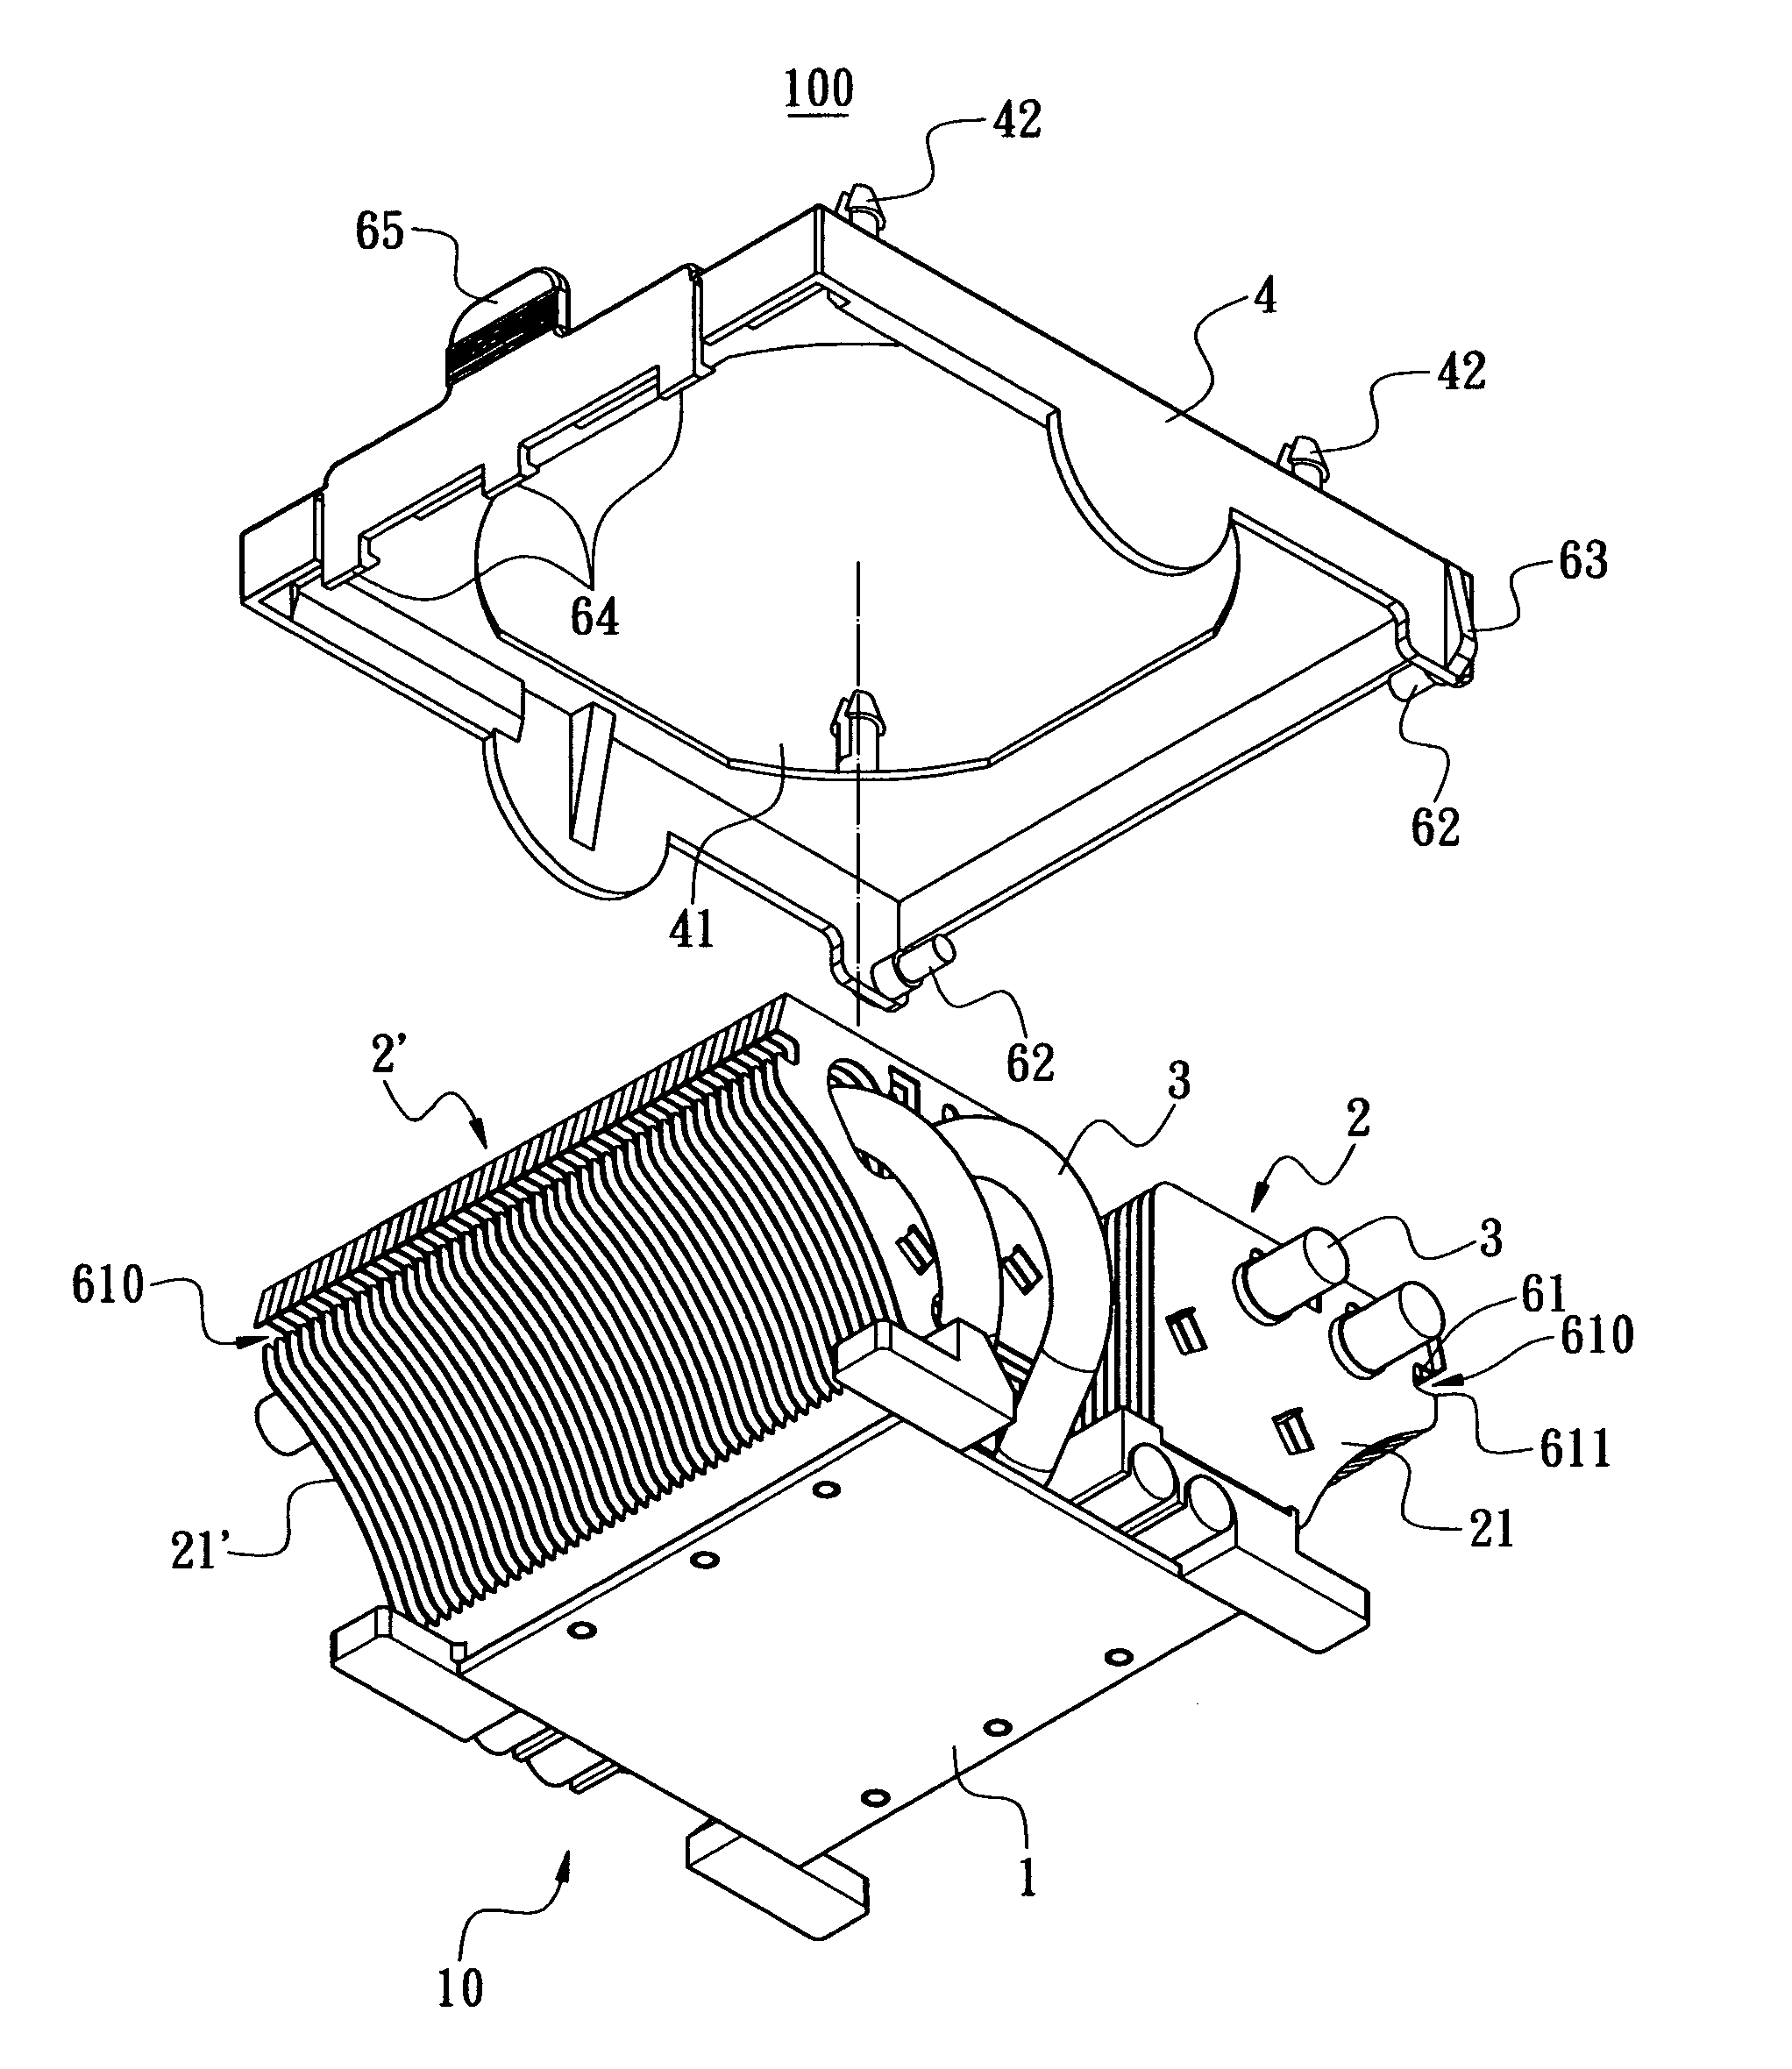 Hood retaining structure for heat-dissipating device